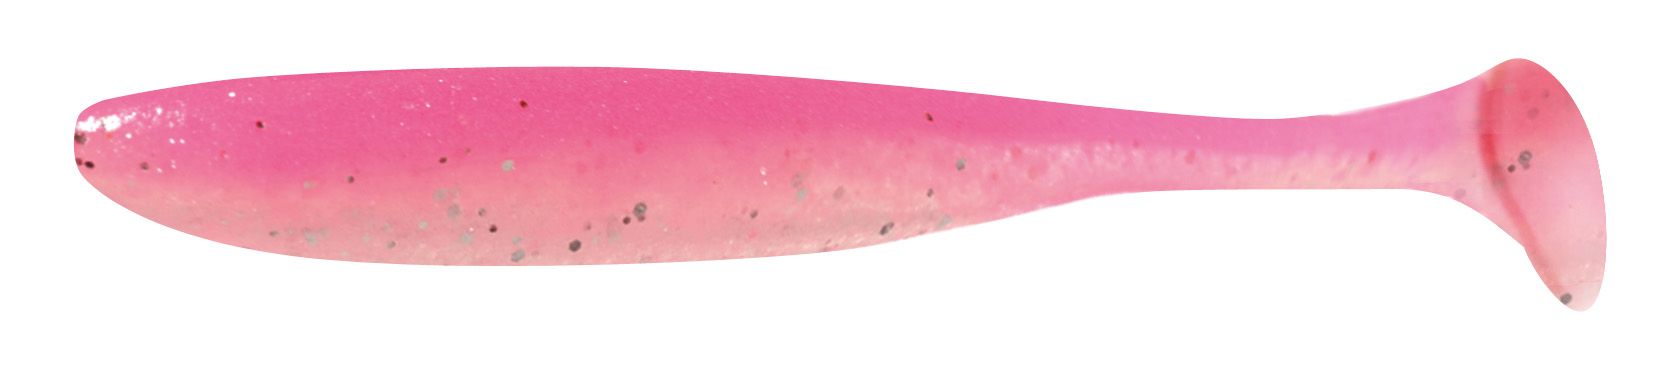 Keitech Easy Shiner 3 in (7,6cm) - S03-Pink Glow